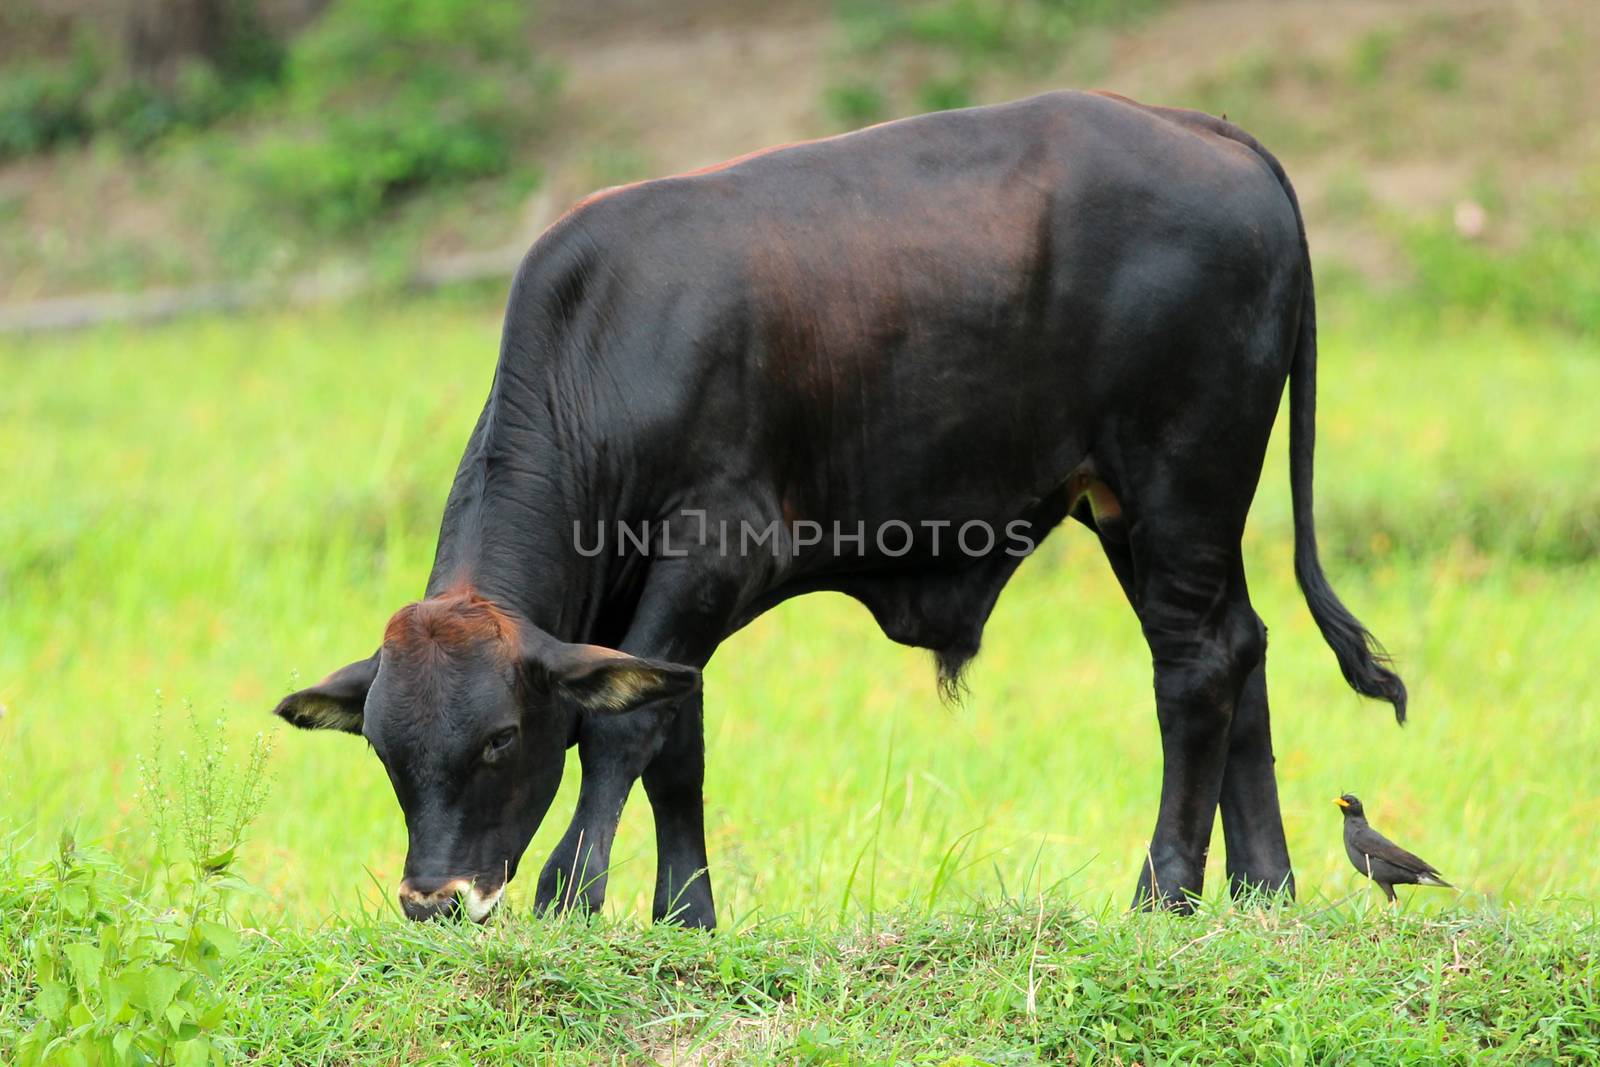 Image of a cow on nature background